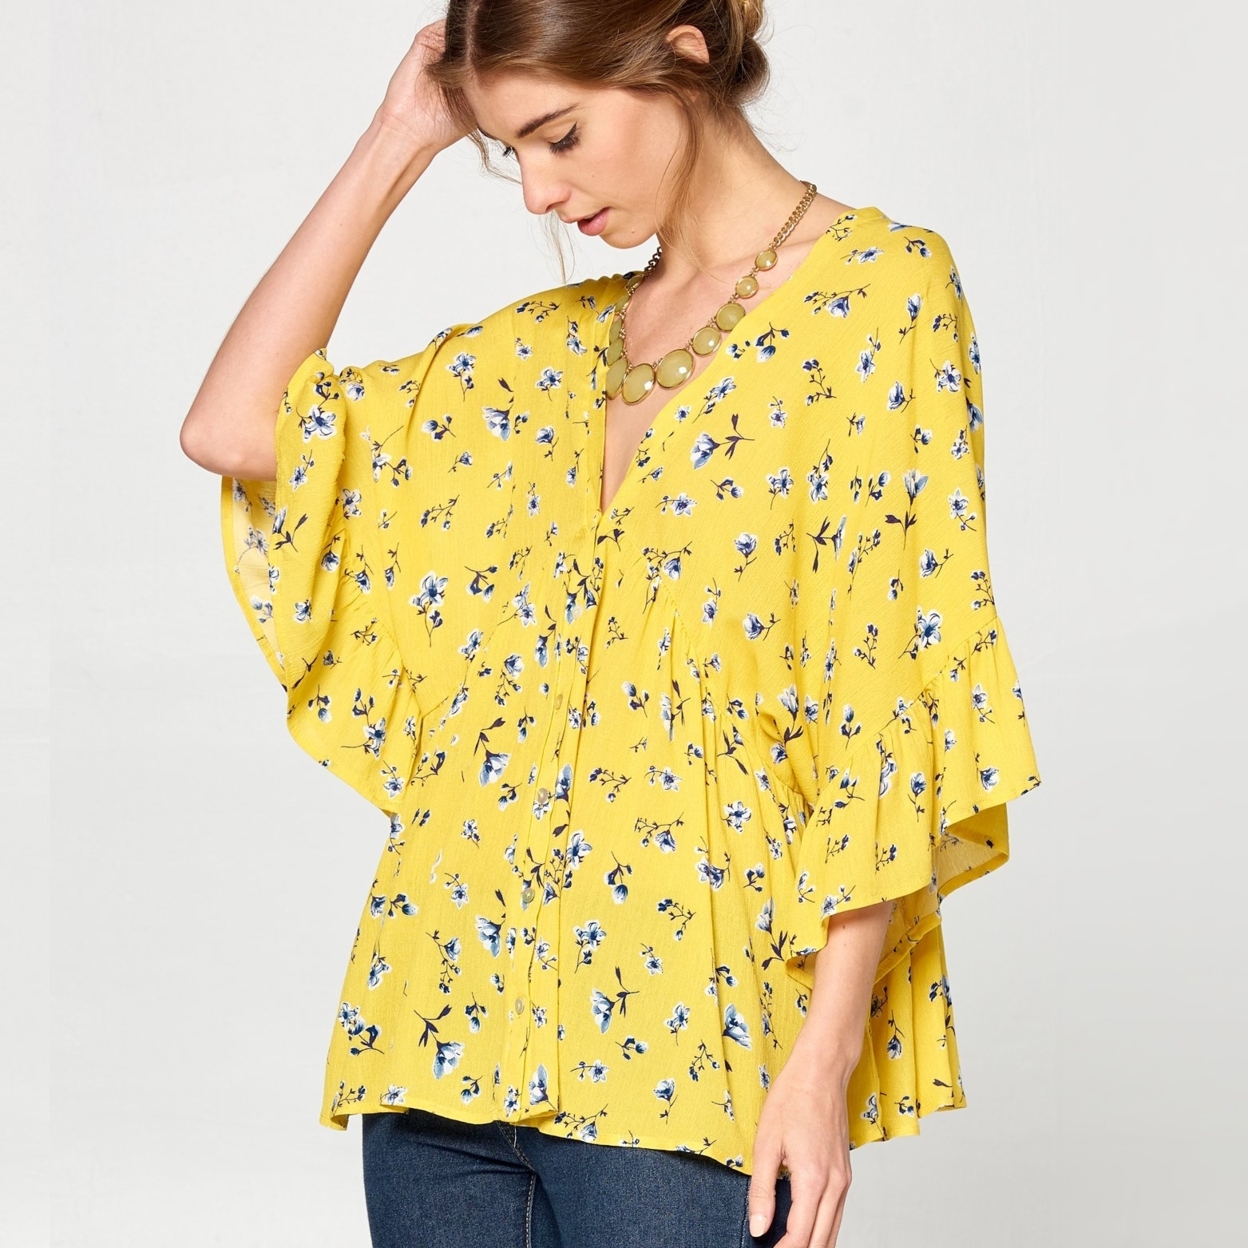 Calico Floral Woven Top - Mustard Yellow, Large (12-14)